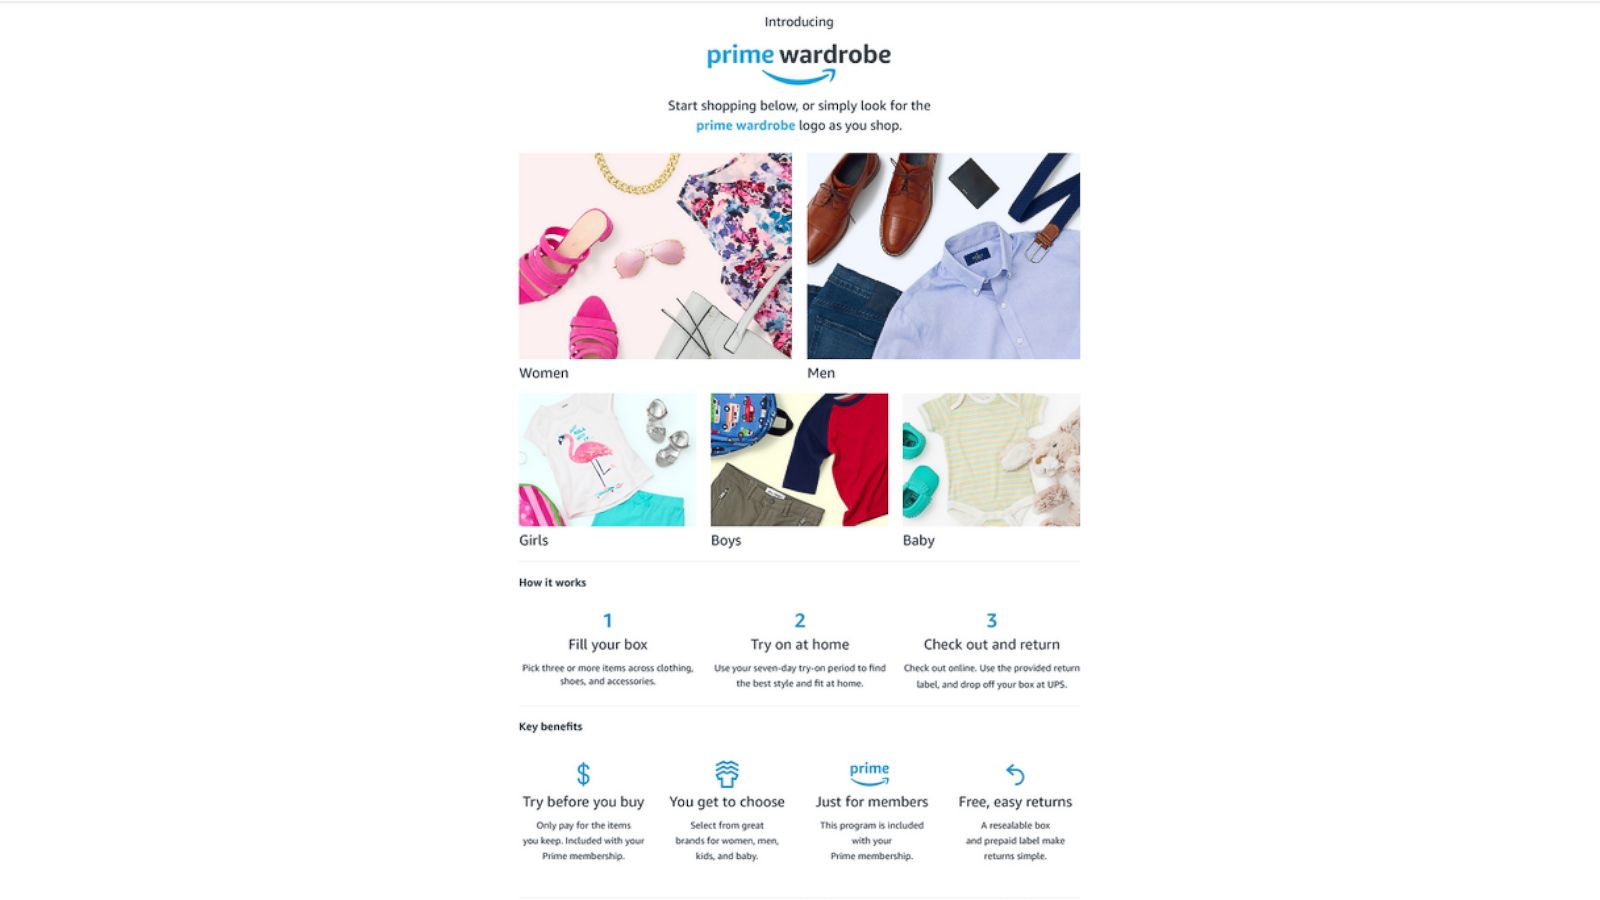 Exclusive 1st look at 's new Prime Wardrobe service that lets you try  before you buy - ABC News